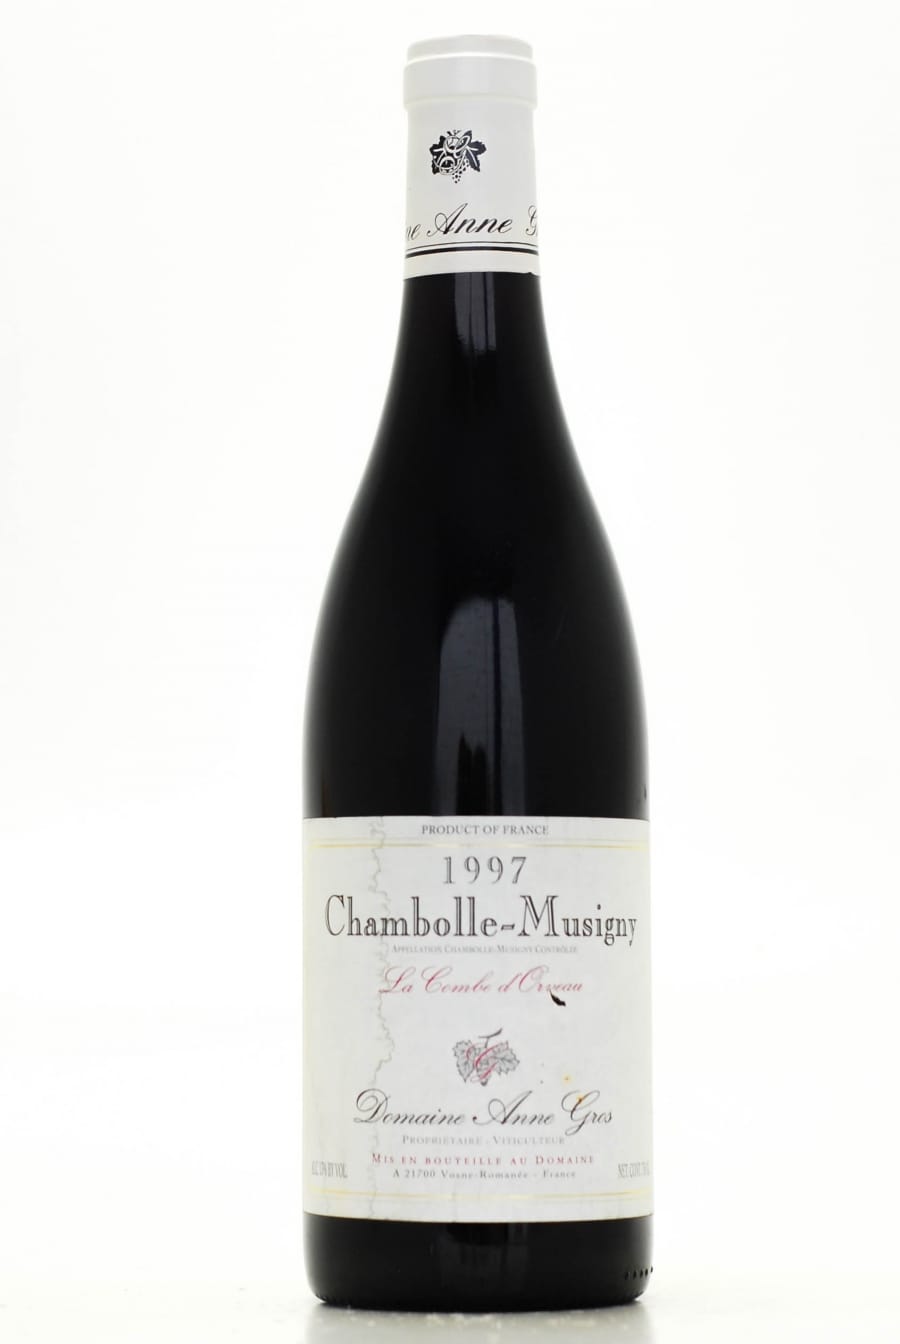 Anne Gros - Chambolle Musigny La Combe D'Orveau 1997 Perfect